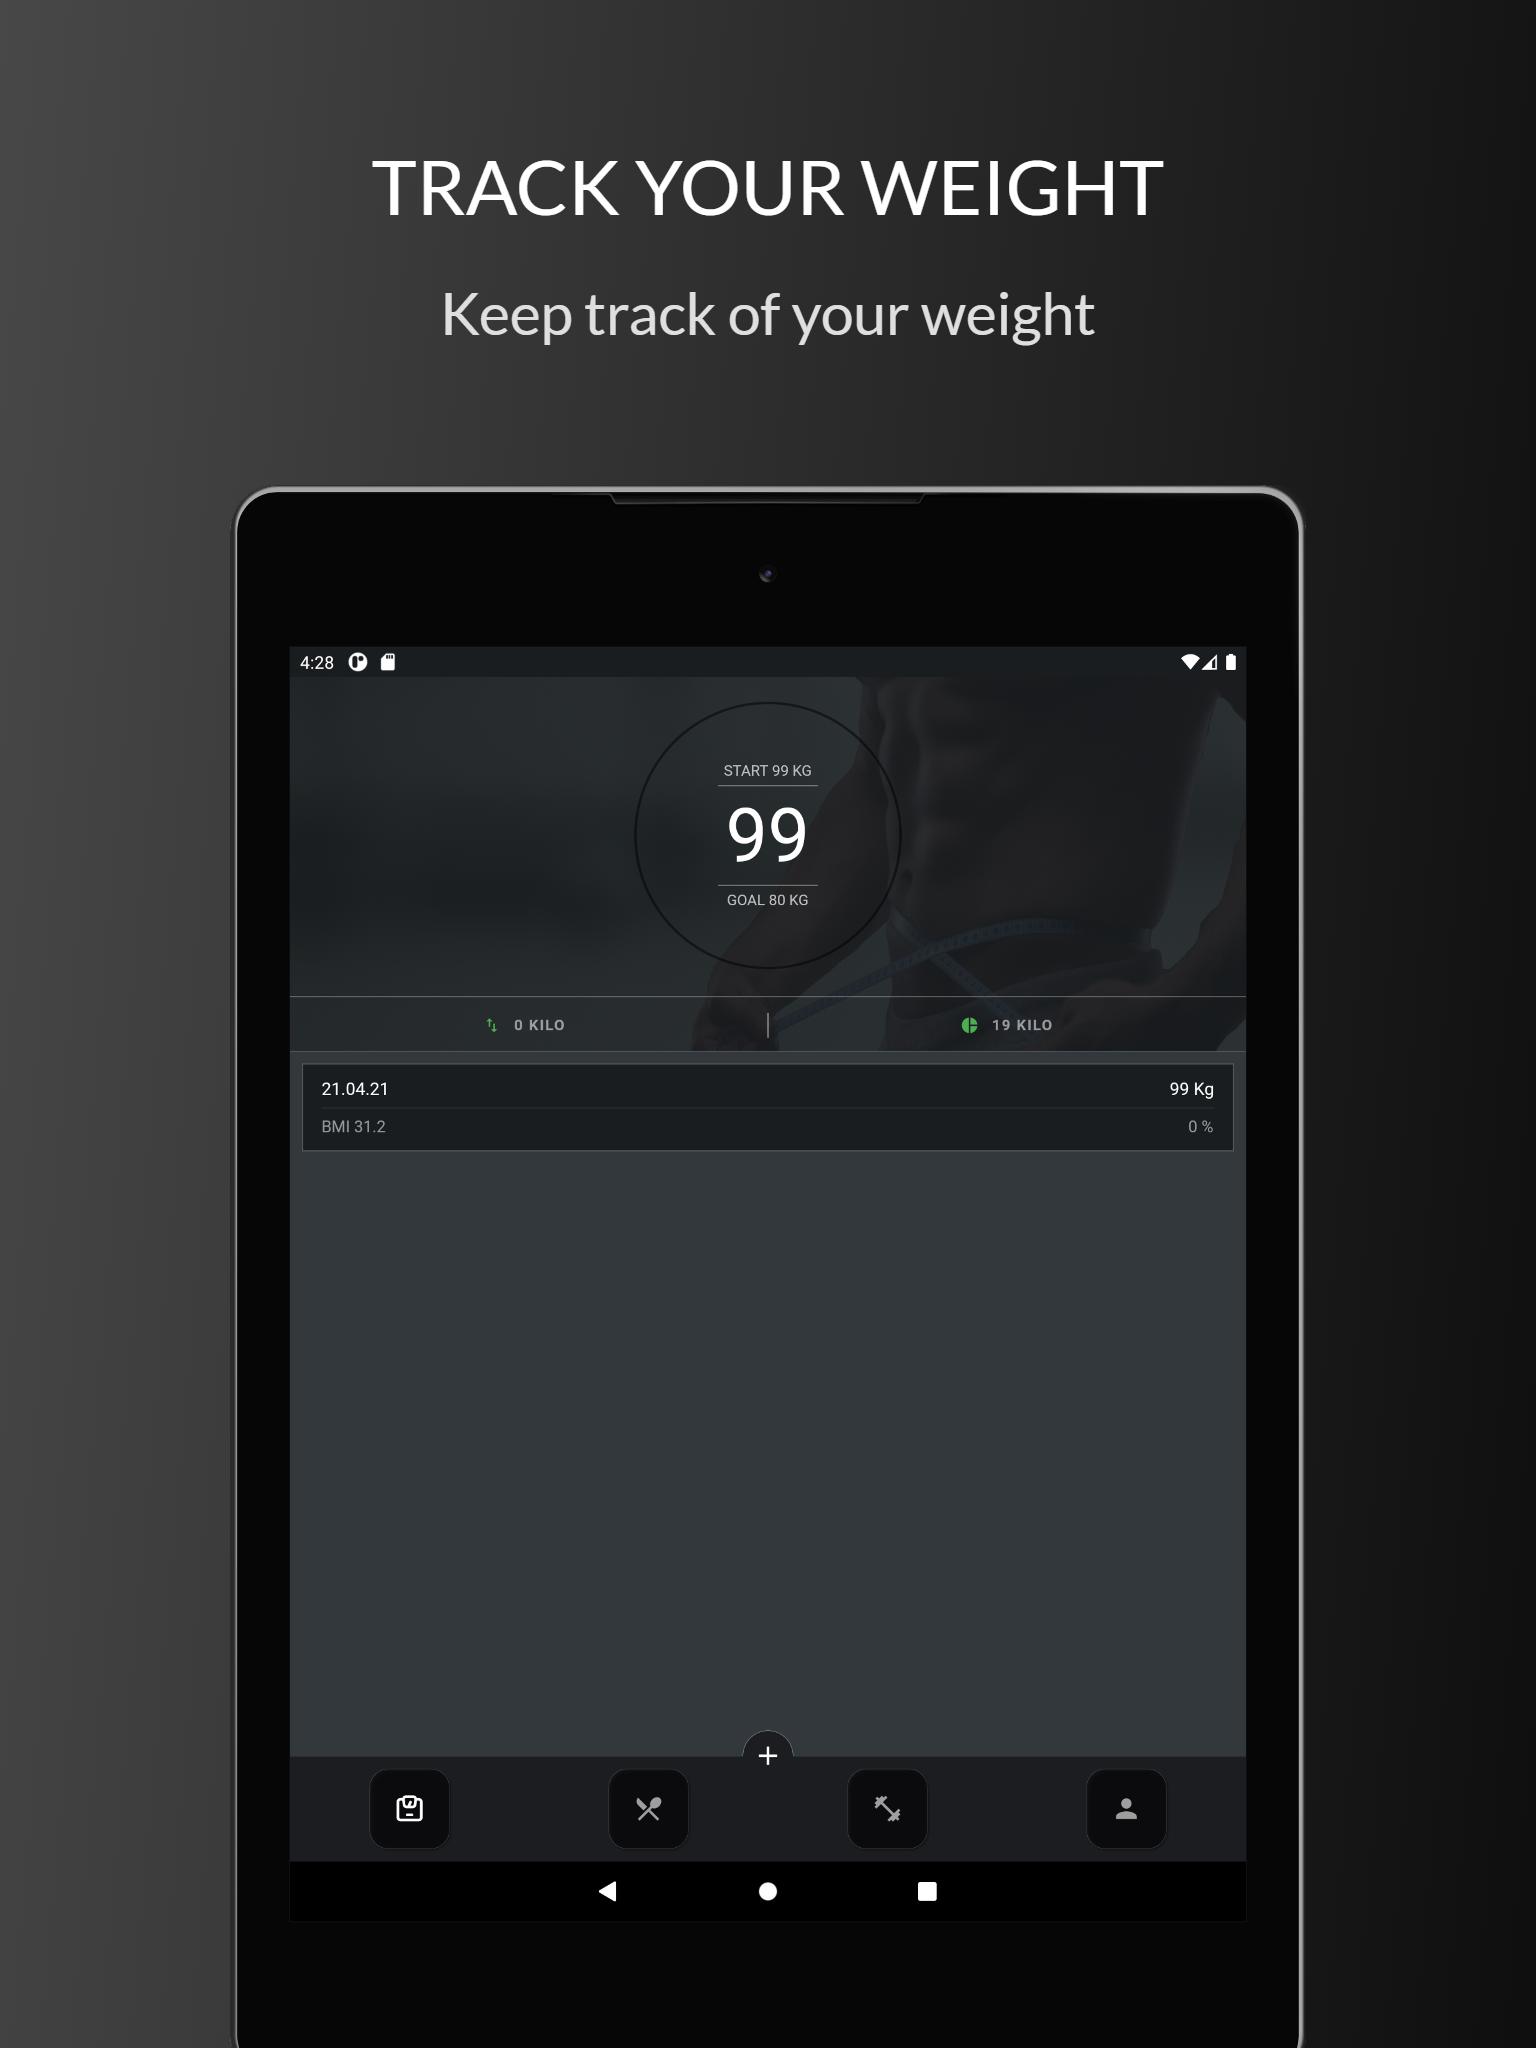 All in One Fitness - Weight Loss, Workouts & More 1.2.2 Screenshot 16